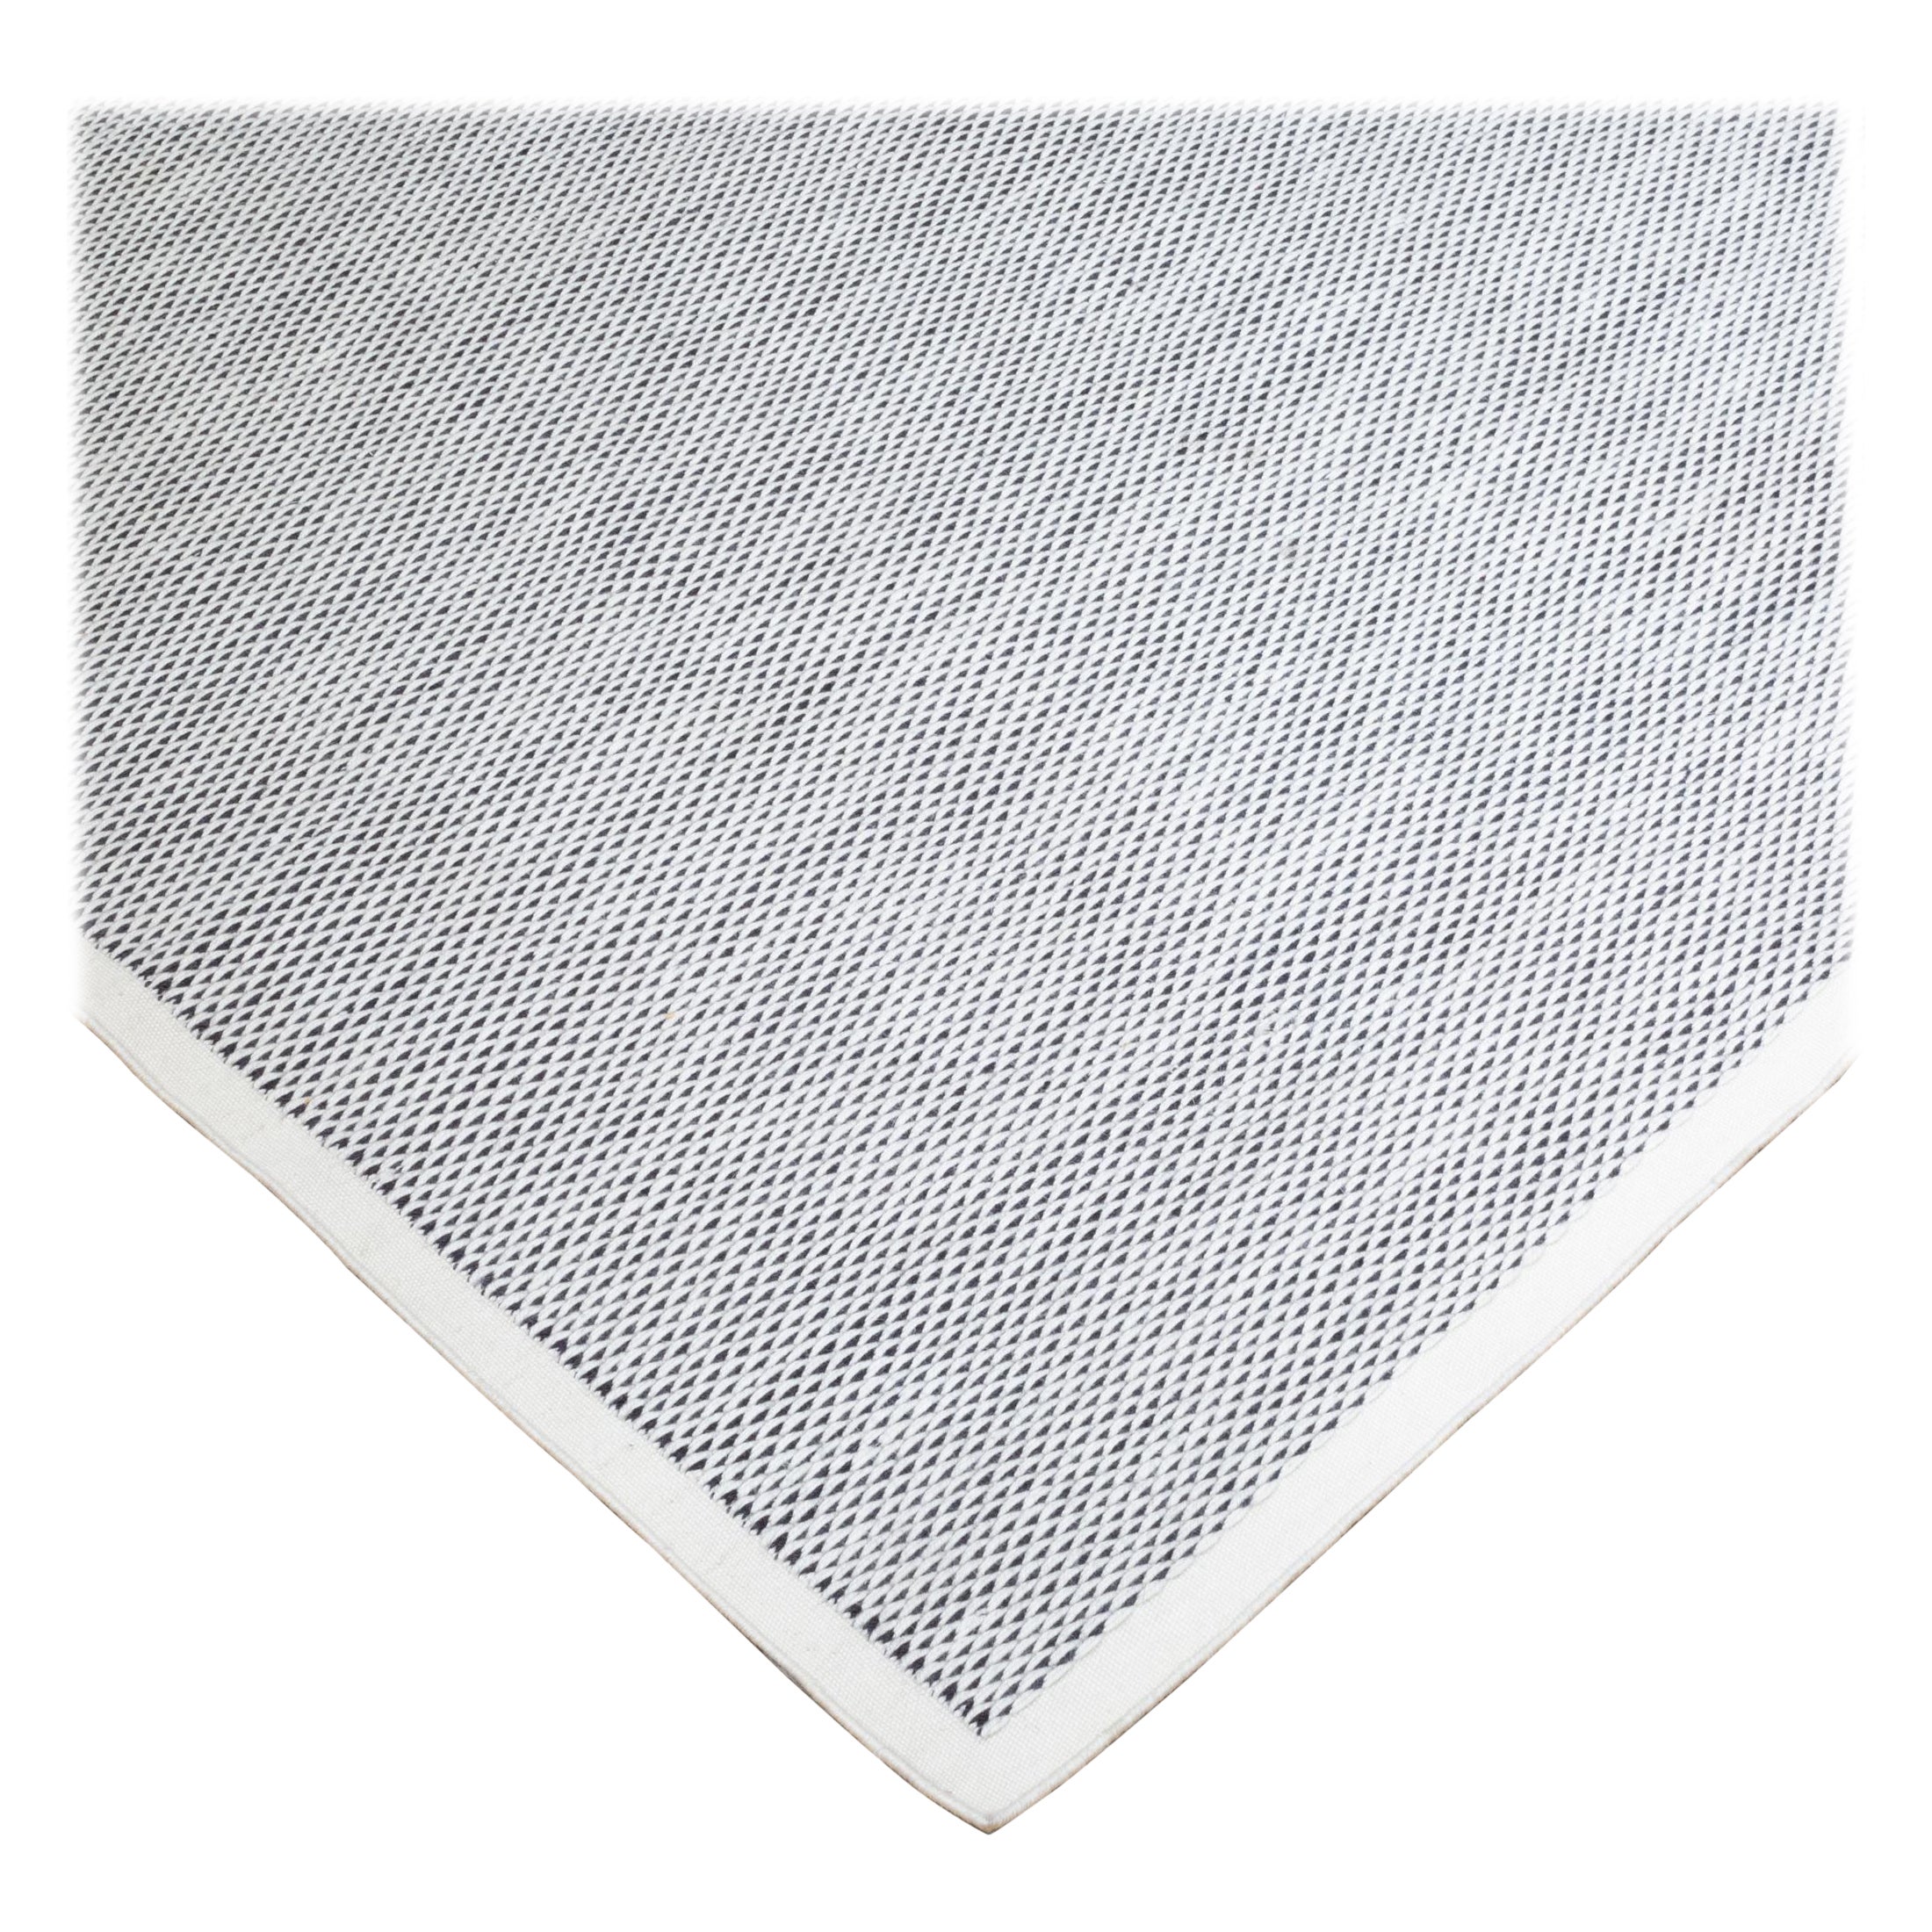 100% Merino Wool Lyxx Area Rug by Fells Andes 5' x 7' (FREE SHIPPING)